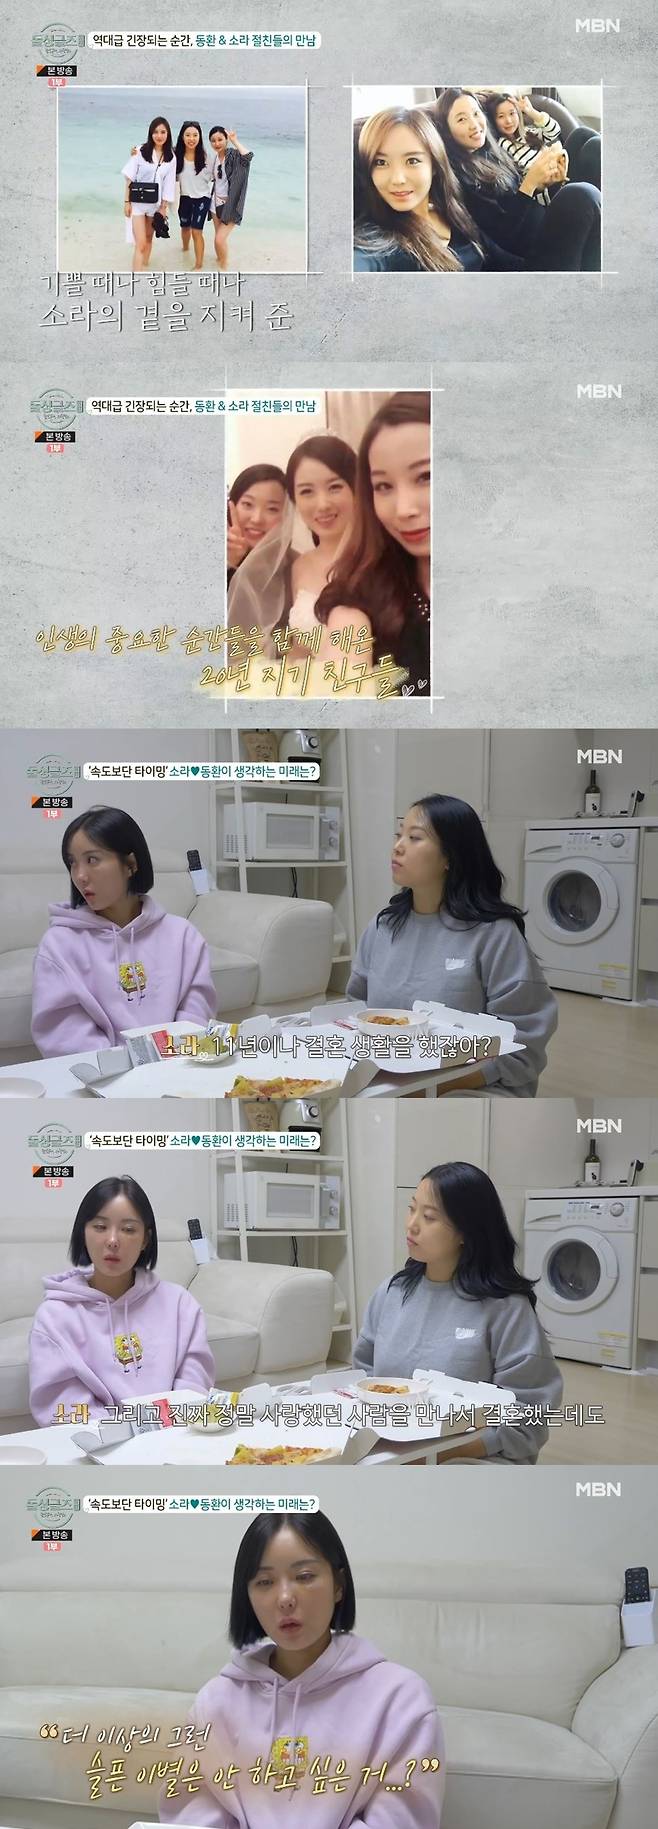 Lee So-ra has released photos of past Wedding Ceremony.In MBNs Singles Abduction - Its OK, I Love You (hereinafter referred to as Dolsing Abduction 2), which aired on November 13, Choi Dong Hwan, who met Lee So-ras friends, was portrayed.On this day, Choi Dong Hwan and Lee So-ra met in Deagu and met Lee So-ras friends.Especially in the video that explains the long friendship of three people, Lee So-ras wedding ceremony wedding photo attracted attention.It was a moment when Lee So-ras pace, which maintains an honest and dignified view of the past, present and future, stood out.On this day, Lee So-ra told his friends, The first marriage is careful, but the remarriage is more prudent. Marriage is not a good thing. There are parents, family, and acquaintances.I met a person I really loved and lived for 11 years and divorced. He explained why he initially rejected Choi Dong Hwan, saying, I didnt want to have any more sad farewells, I had a wall of hearts.I thought I wasnt going to remarry, but I didnt feel like I wasnt going to do it at all. Everyone has a different speed of love. I didnt want to be fast with my brother. I wanted to be faithful to my good feelings, he said.(Photo = MBN Broadcast Capture